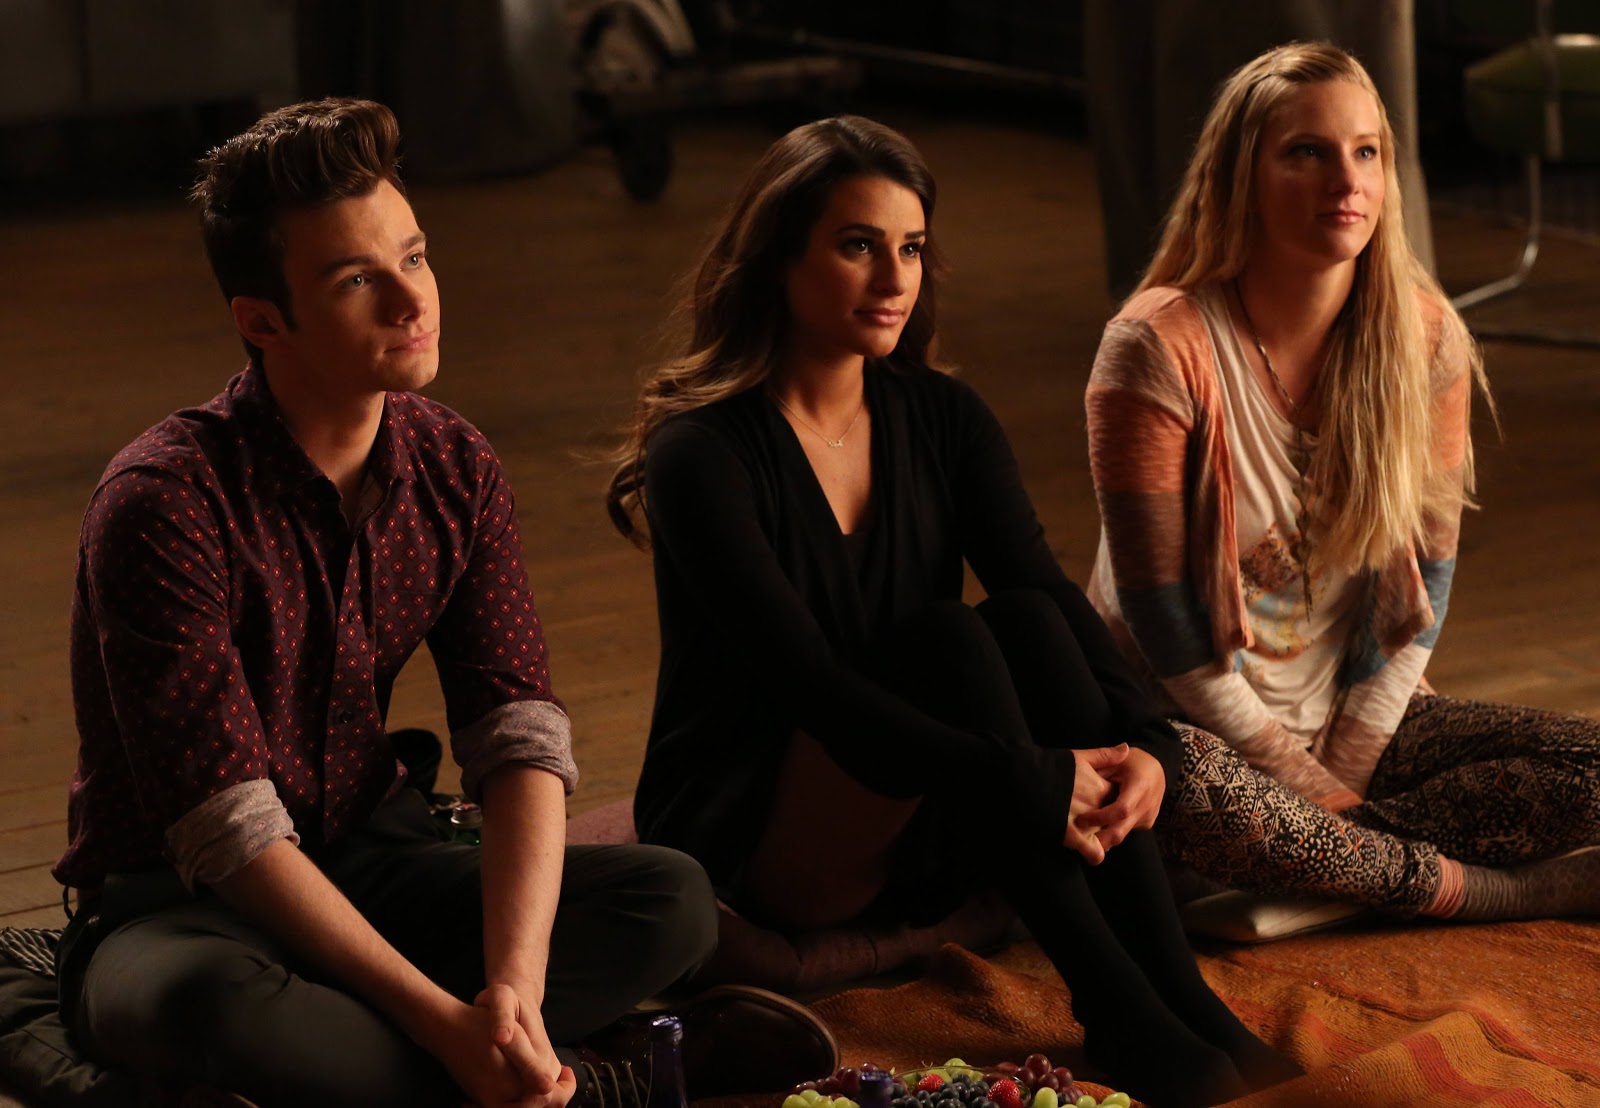 Glee - Episode 5.20 - The Untitled Rachel Berry Project (Season Finale) - Promotional Photos